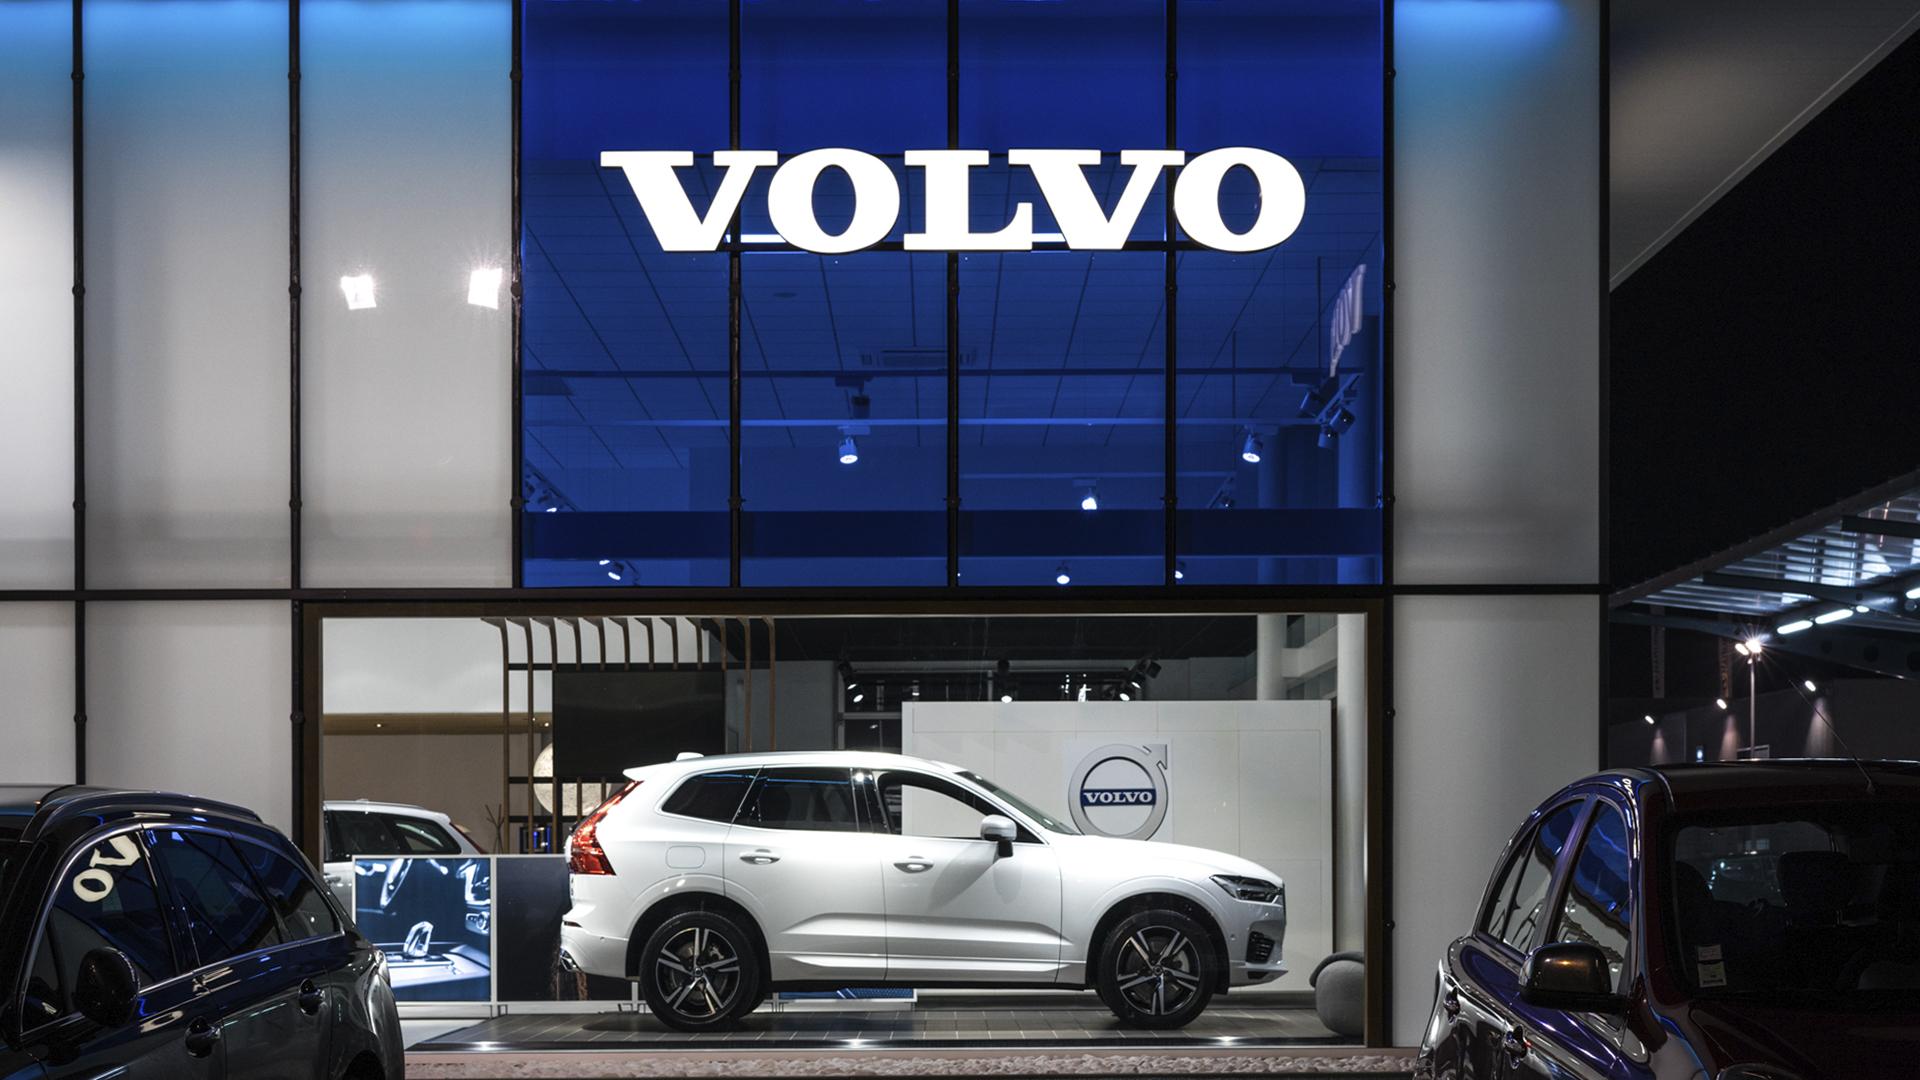 Volvo light sign manufactured by Visotec